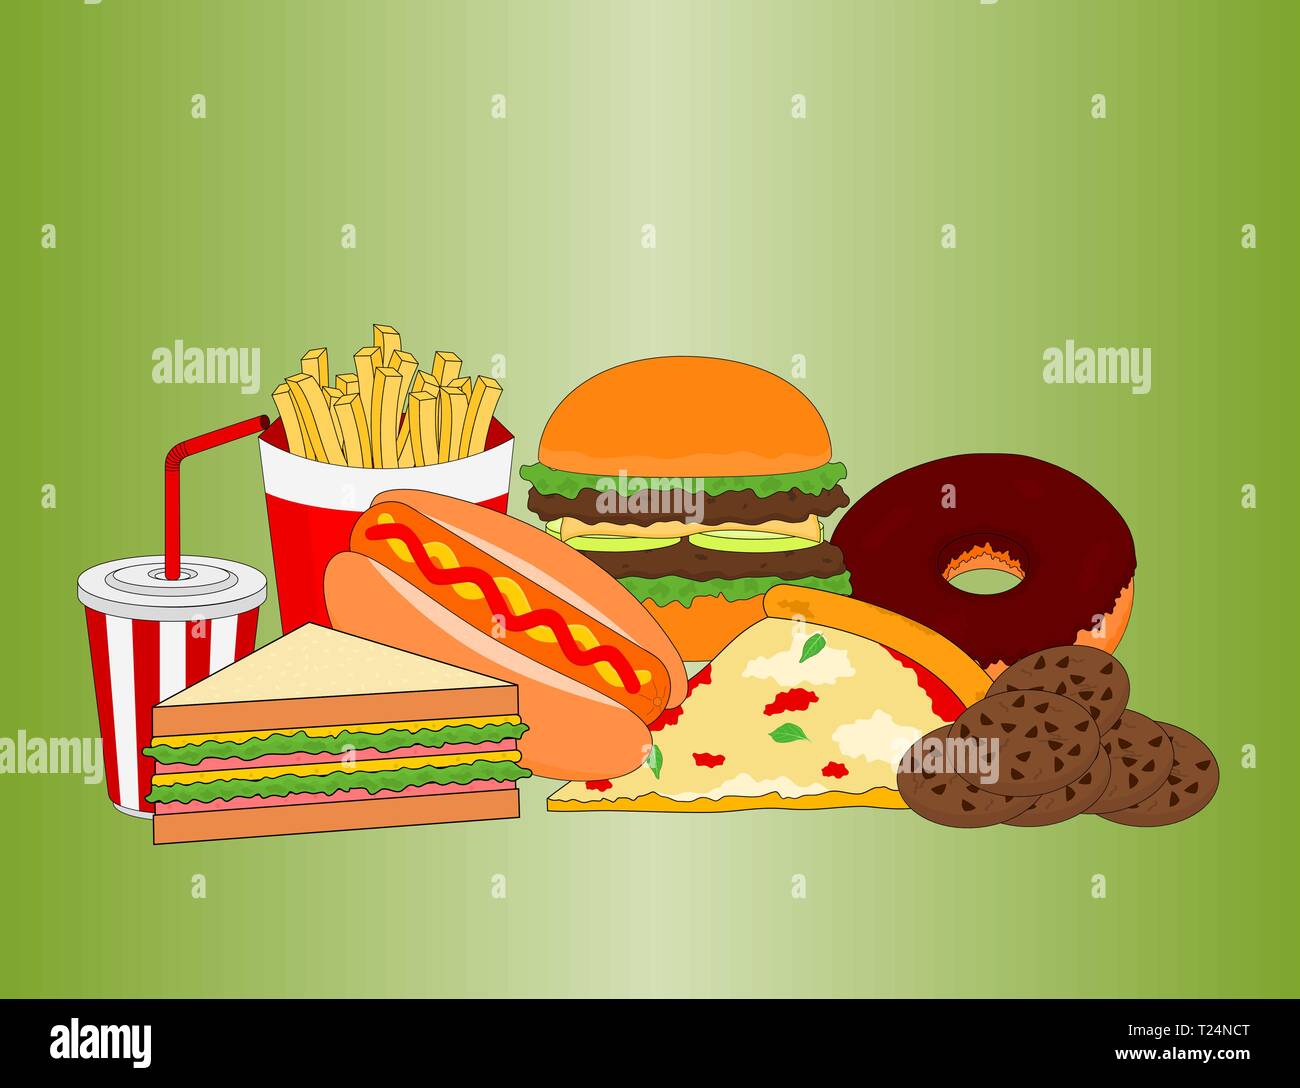 Delicious fast food dinner menu on green background Stock Vector